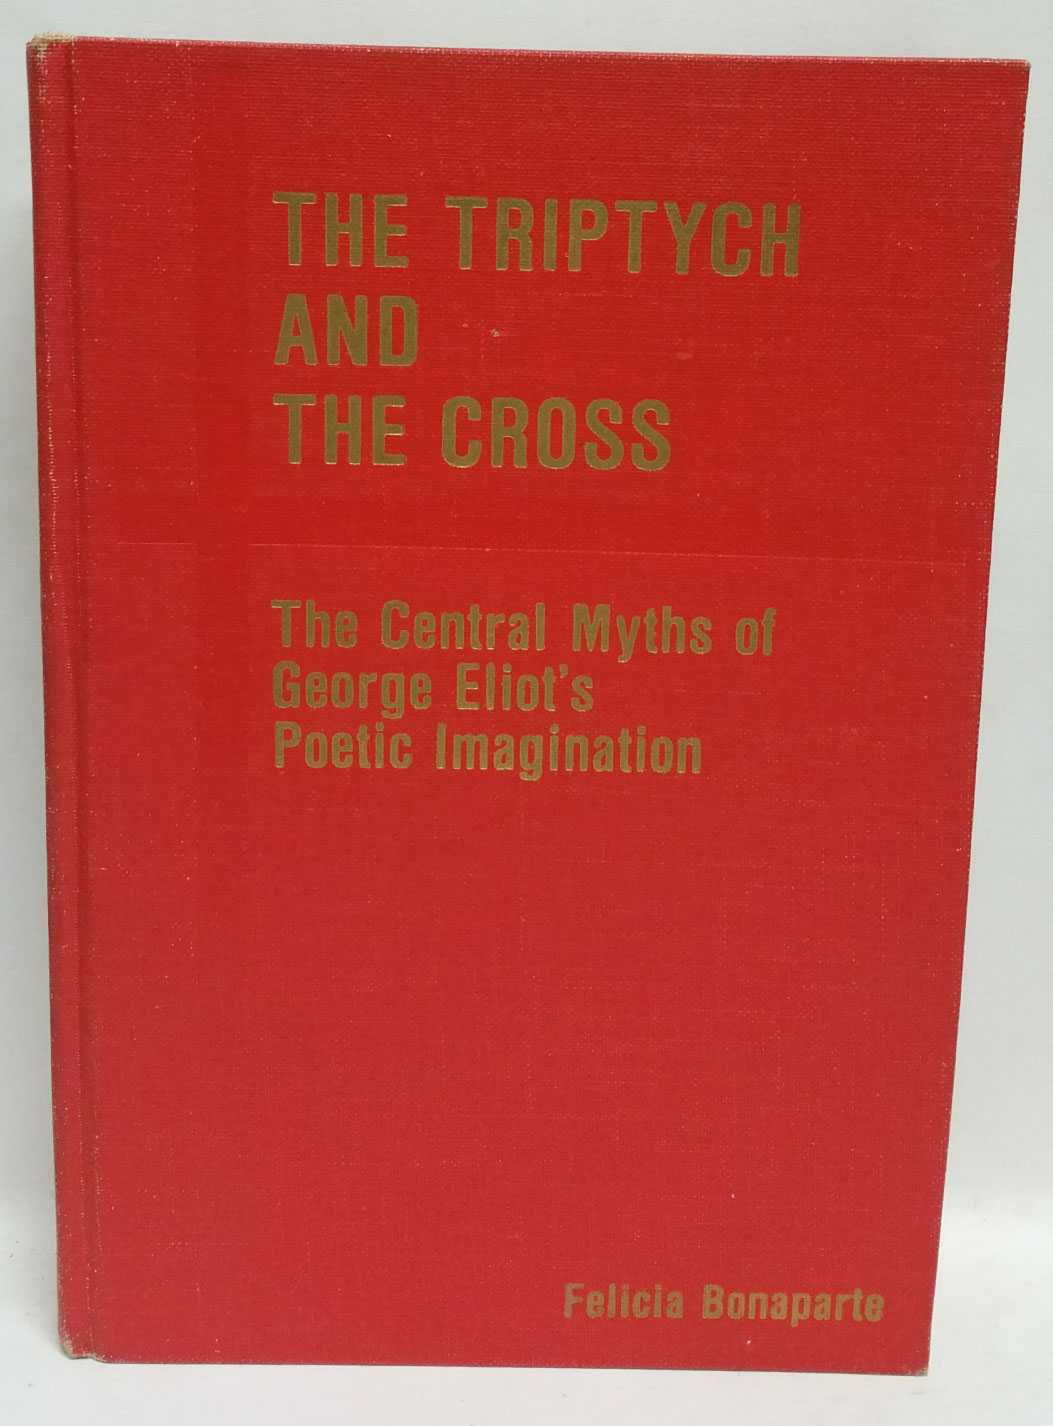 Felicia Bonaparte - The Triptych and The Cross: The Central Myths of George Eliot's Poetic Imagination